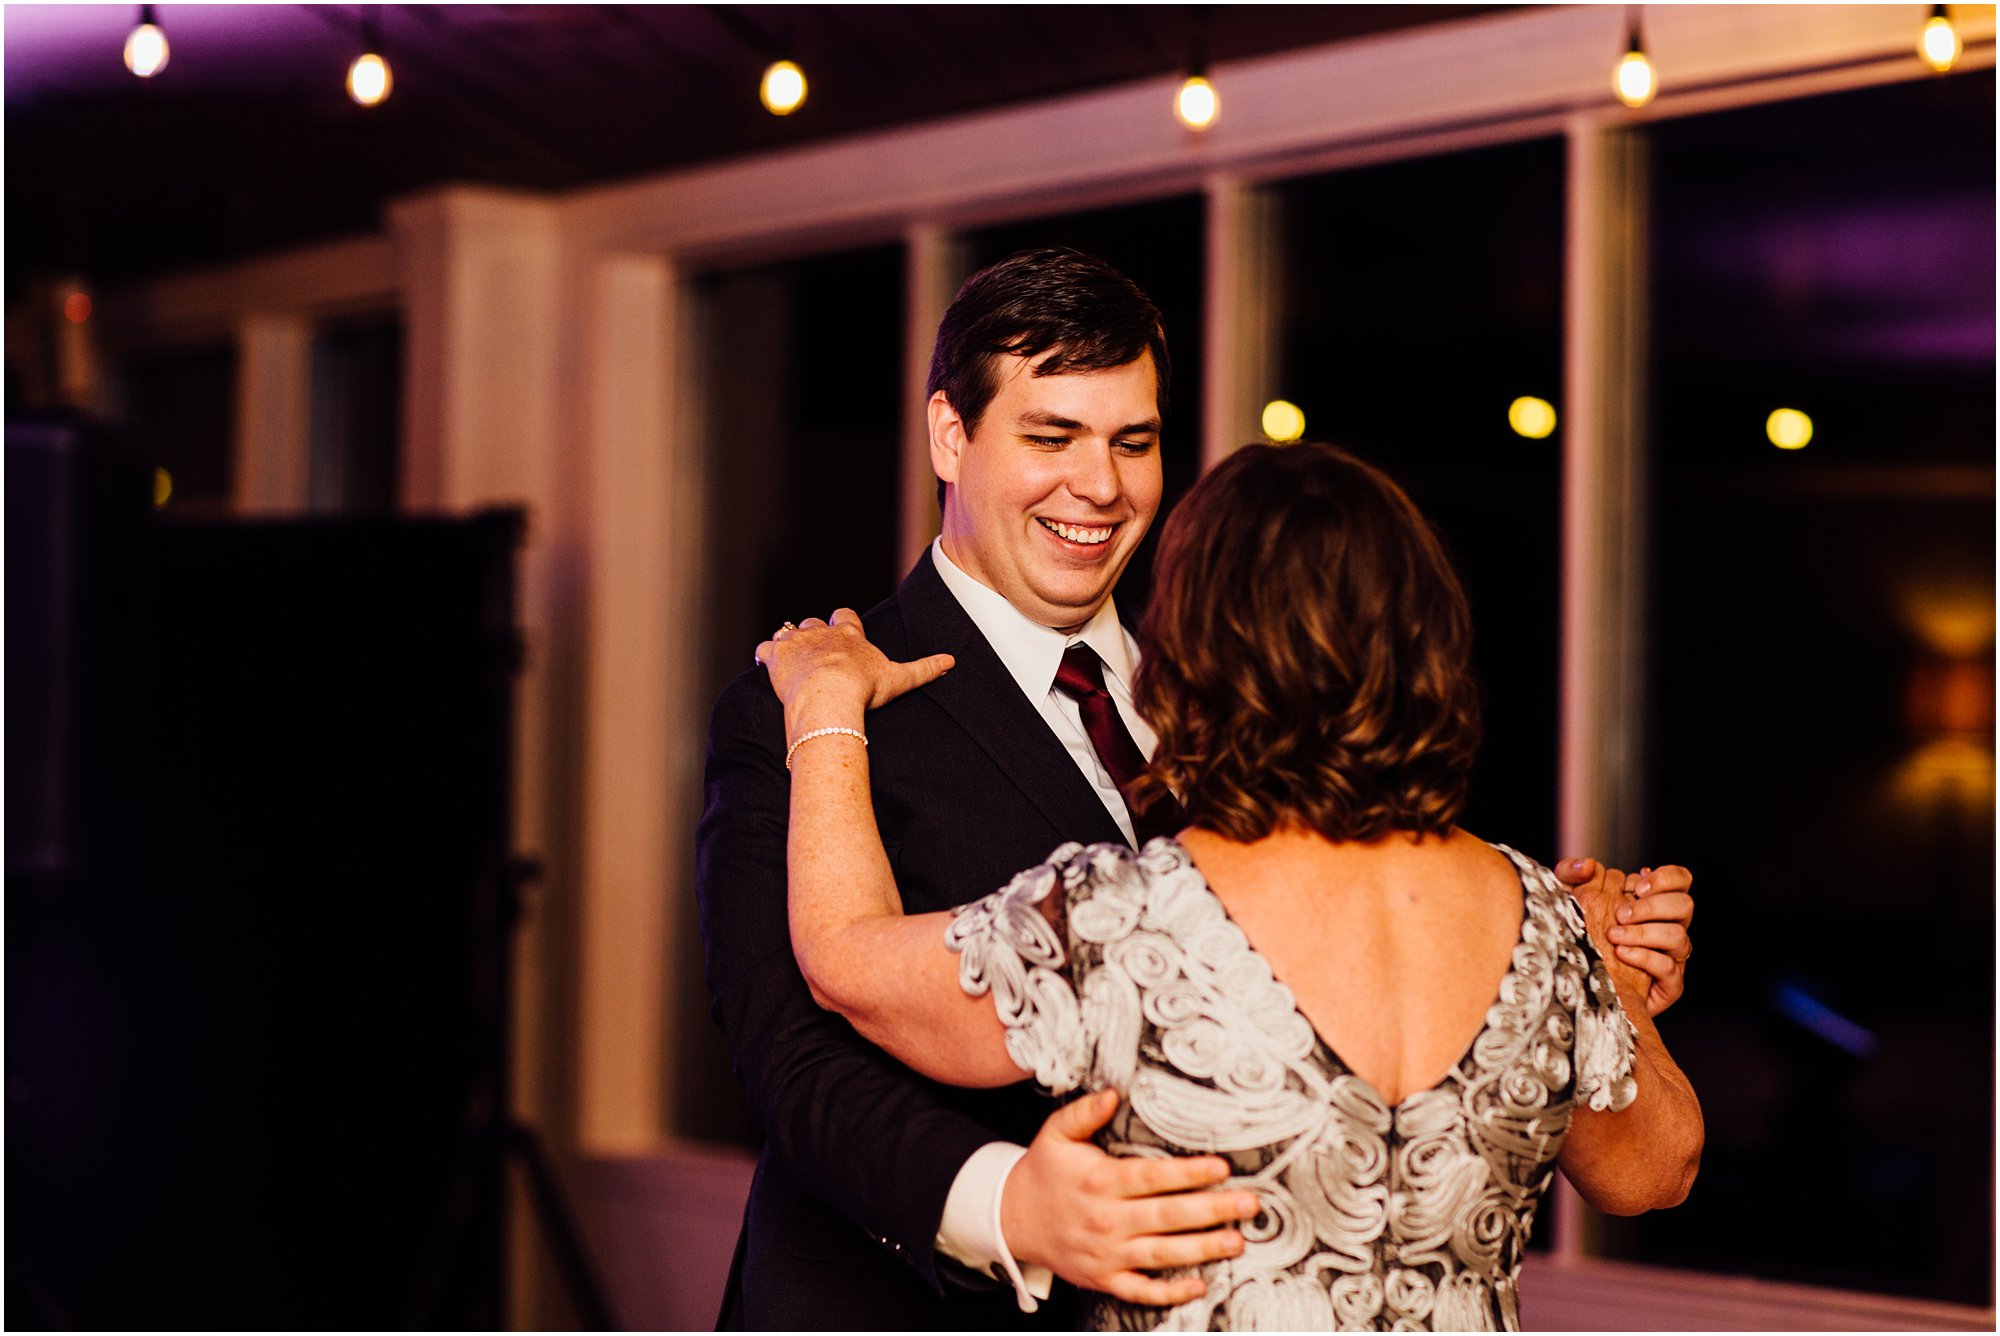 Mother and son dancing together during his Club Windward wedding reception